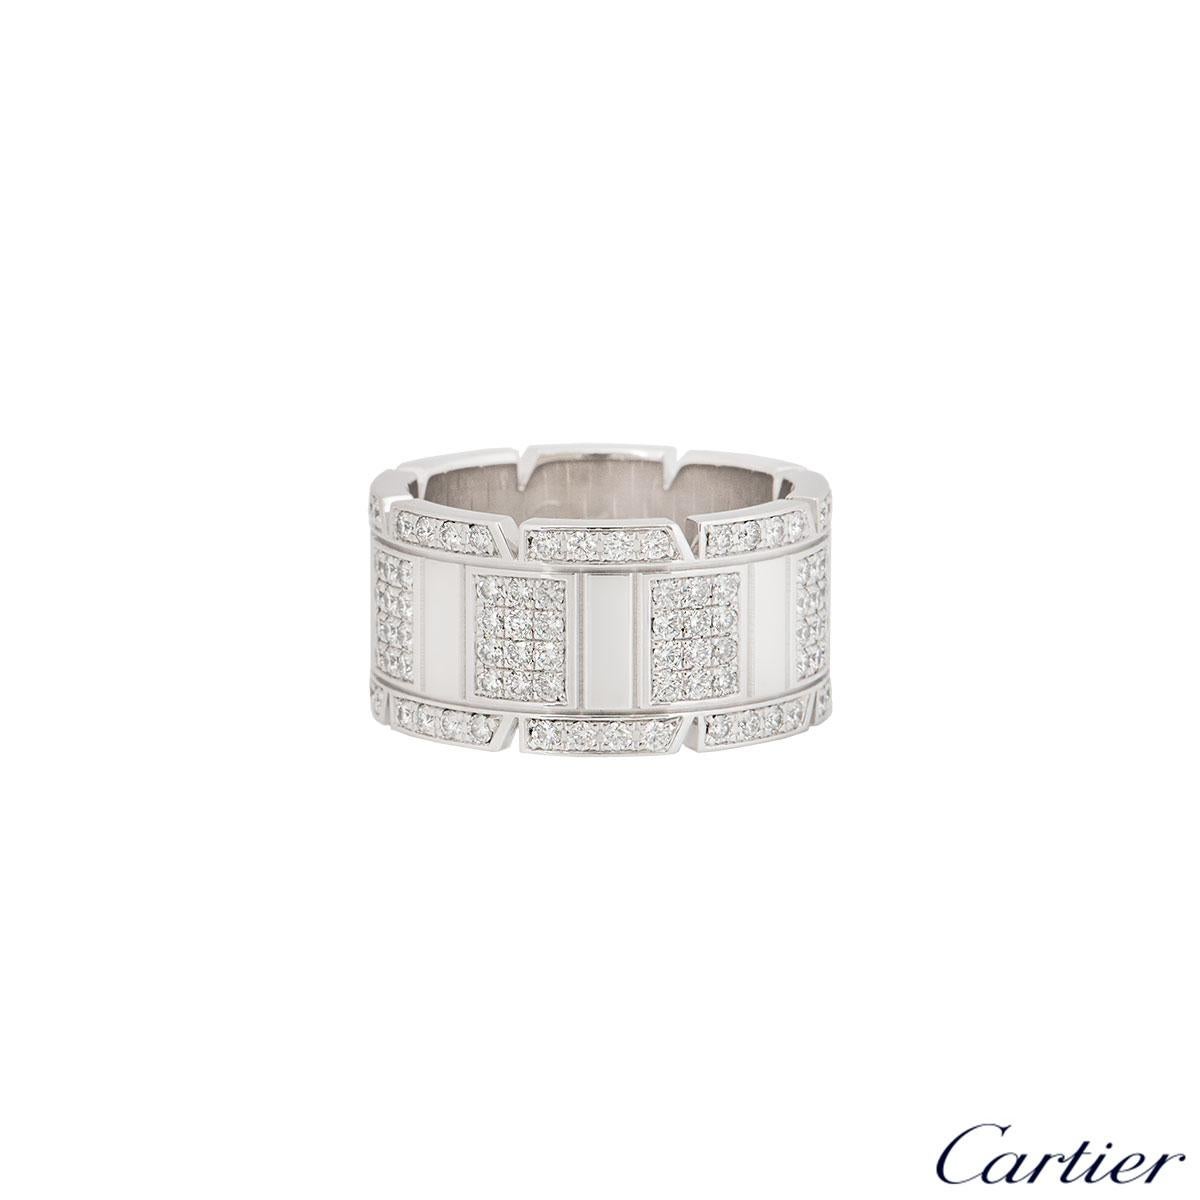 A beautiful 18k white gold plain ring by Cartier Tank Francaise from the Links and Chain collection. The ring is composed of the iconic triple row of brick work design set throughout with 160 round brilliant cut diamonds in a pave setting with a